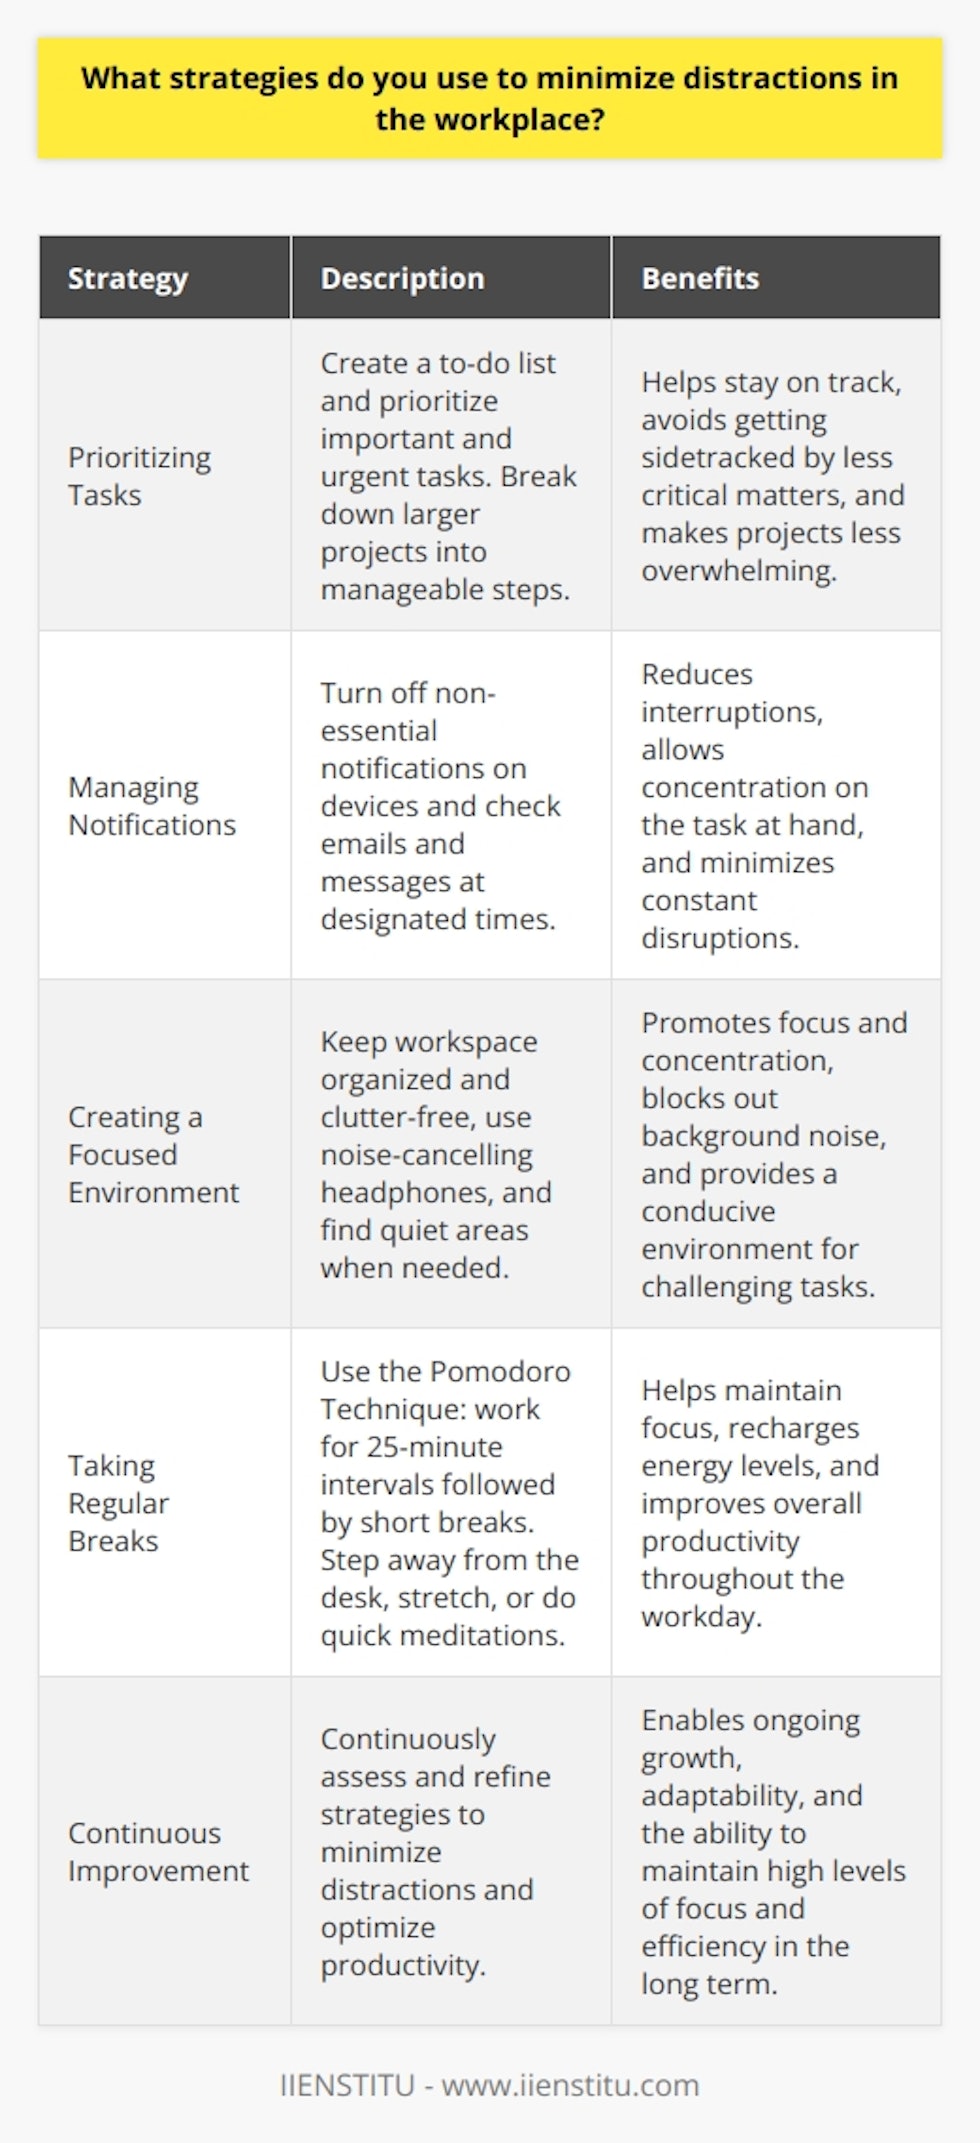 To minimize distractions in the workplace, I use several strategies that help me stay focused and productive: Prioritizing Tasks I start each day by creating a to-do list and prioritizing the most important and urgent tasks. This helps me stay on track and avoid getting sidetracked by less critical matters. I break down larger projects into smaller, manageable steps to make them less overwhelming. Managing Notifications I turn off non-essential notifications on my phone and computer to reduce interruptions. I check my emails and messages at designated times throughout the day, rather than constantly monitoring them. This allows me to concentrate on the task at hand without constant disruptions. Creating a Focused Environment I try to create a workspace that promotes focus and concentration. I keep my desk organized and clutter-free, and I use noise-cancelling headphones when needed to block out background noise. If Im working on a particularly challenging task, I might even find a quiet room or area to work in. Taking Regular Breaks While it might seem counterintuitive, taking regular breaks actually helps me maintain my focus. I use the Pomodoro Technique, which involves working for 25-minute intervals followed by short breaks. During these breaks, I step away from my desk, stretch, or do a quick meditation to recharge. By implementing these strategies, Ive found that Im able to minimize distractions and maintain a high level of productivity throughout the workday. Its an ongoing process, but Im committed to continuously improving my focus and efficiency.